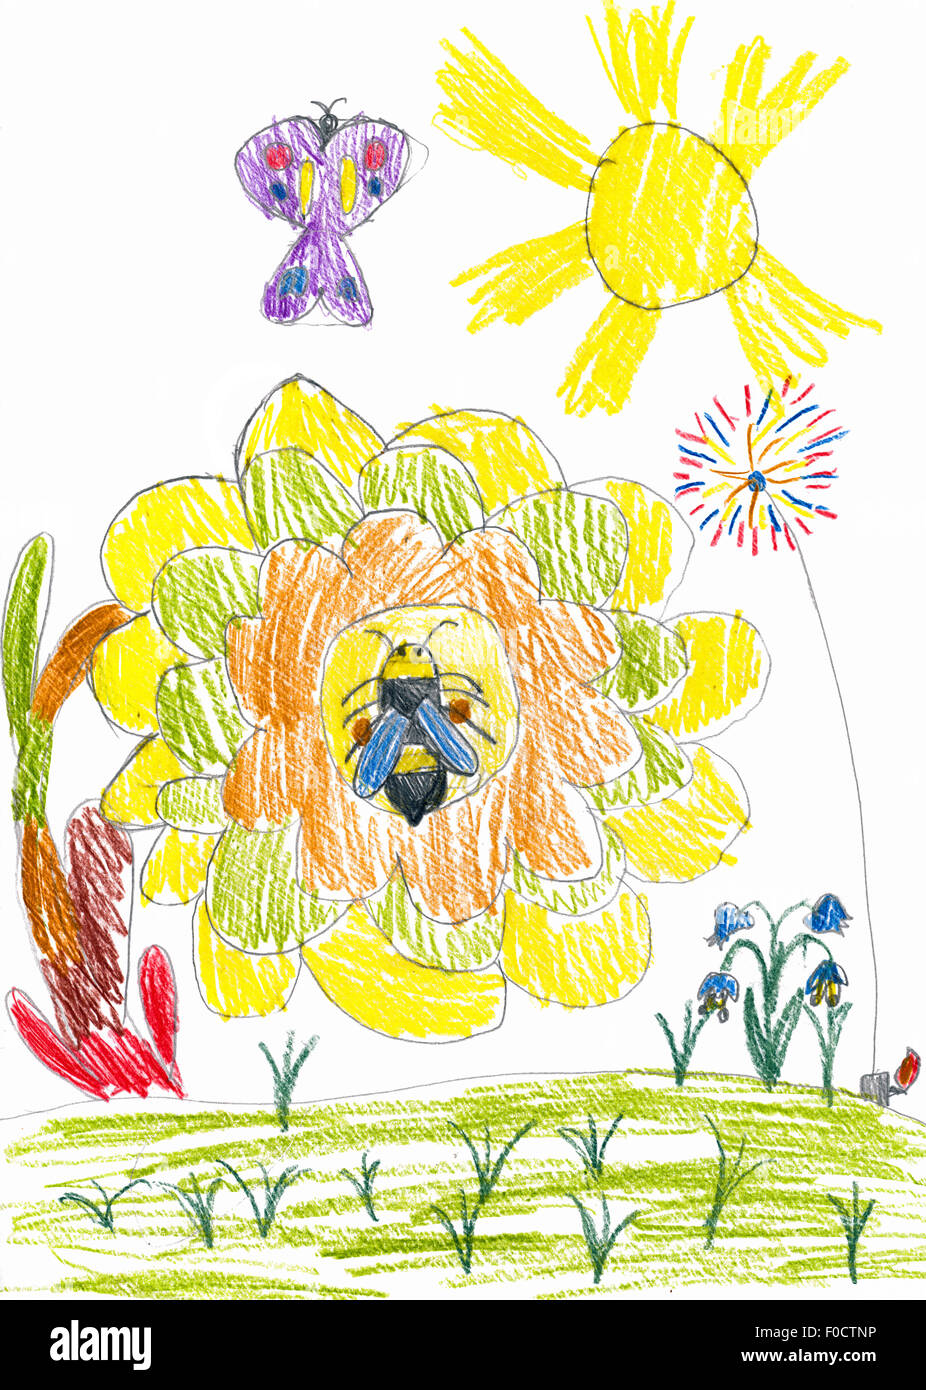 Sunflower Drawing Child High Resolution Stock Photography And Images Alamy Trace lines onto the stem in free strokes to mark the sunflower leaves. https www alamy com stock photo honey bee on sunflower and butterfly child drawing 86334690 html